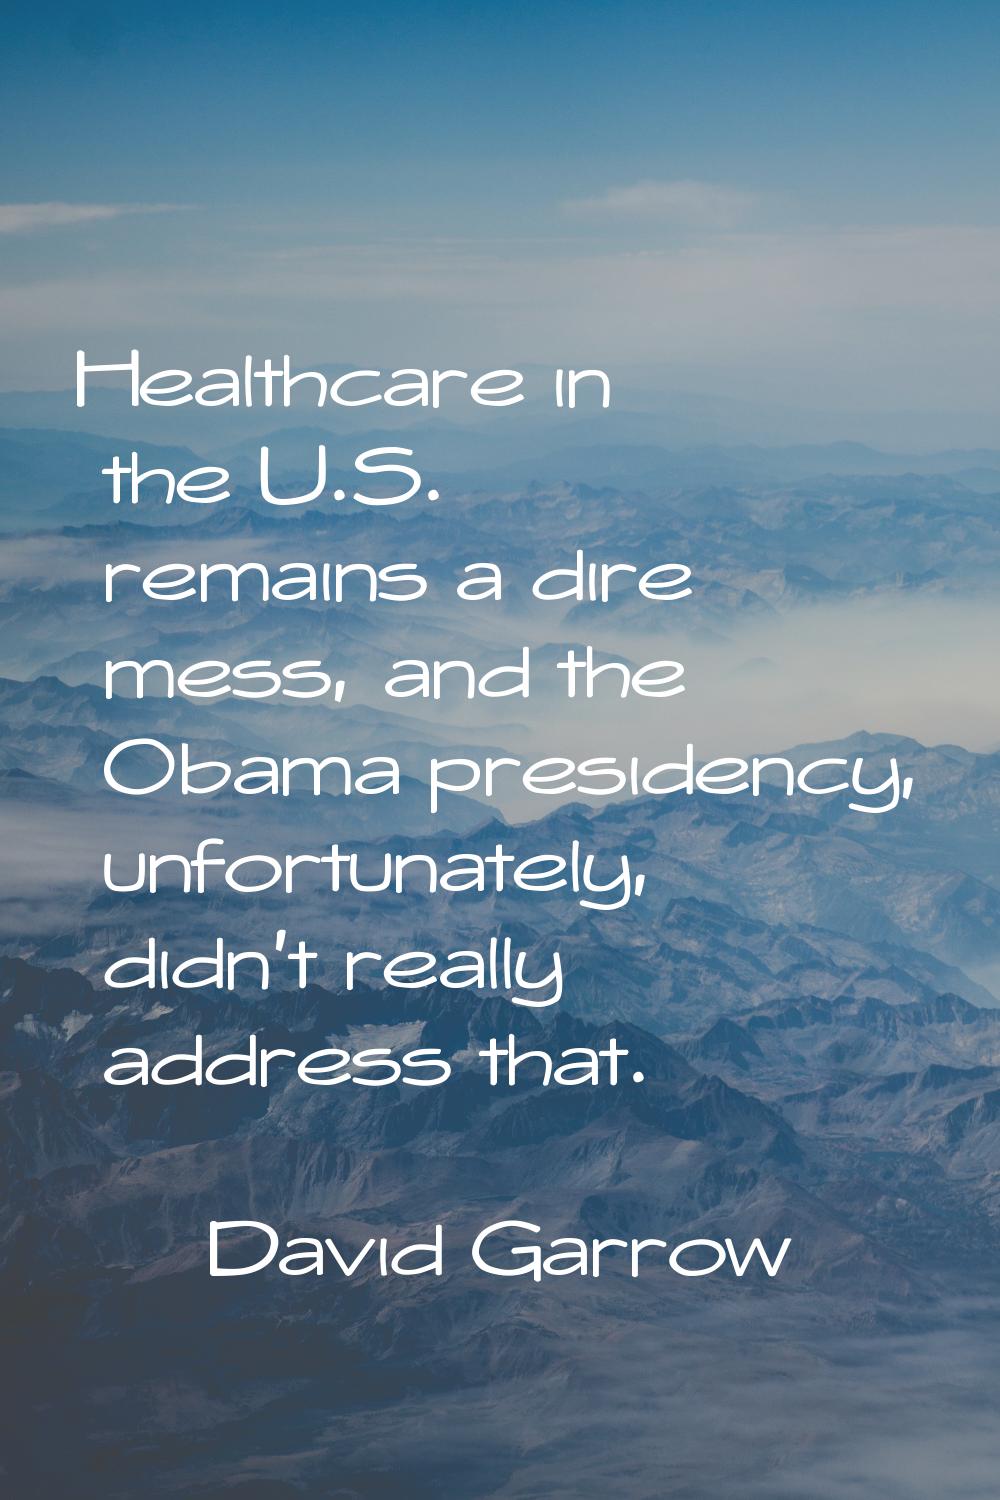 Healthcare in the U.S. remains a dire mess, and the Obama presidency, unfortunately, didn't really 